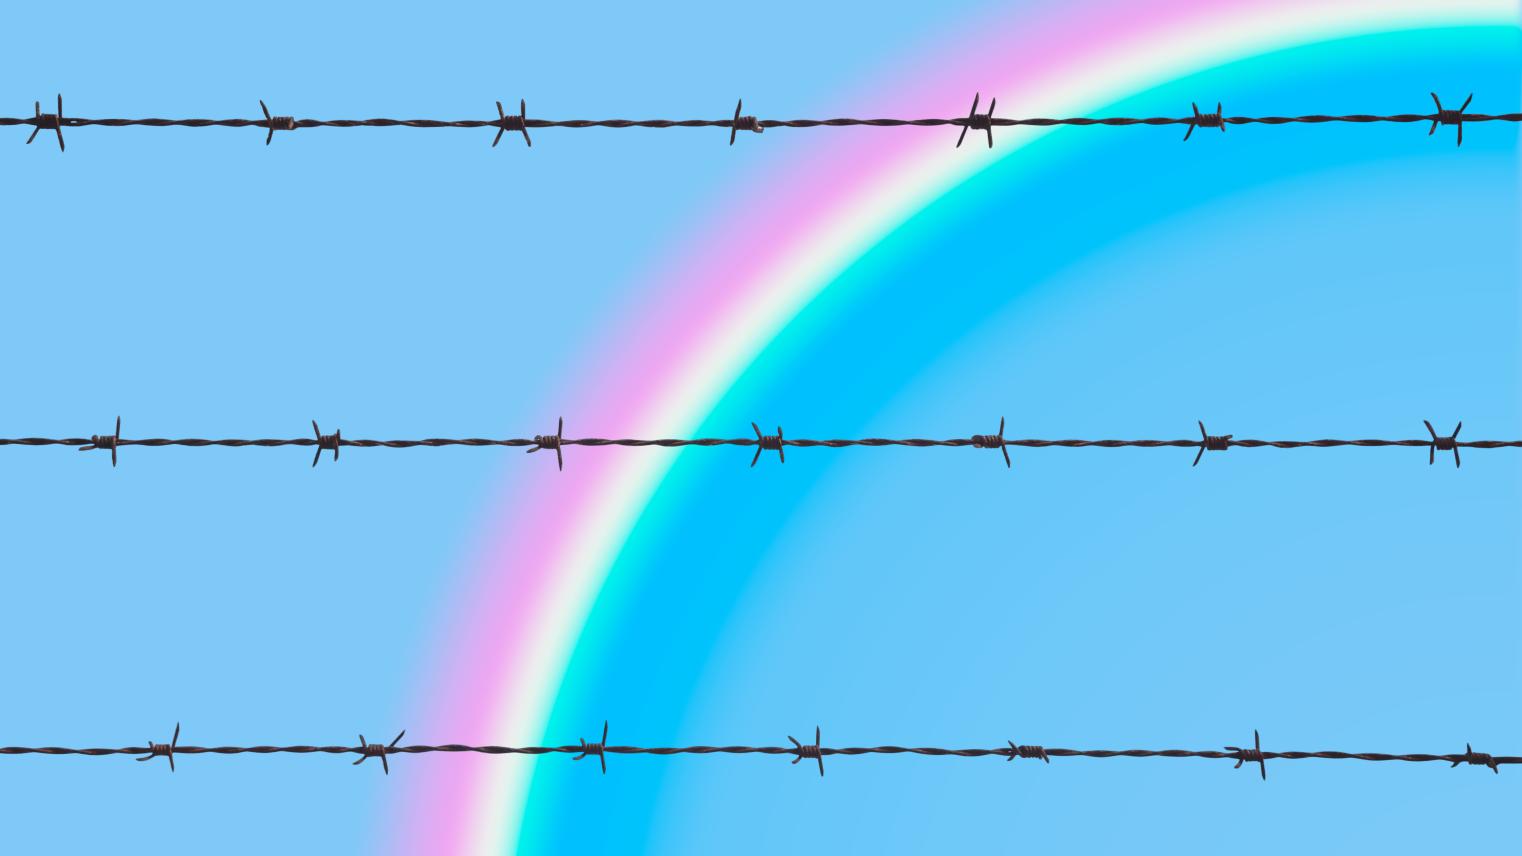 A barbed wire fence with a rainbow.